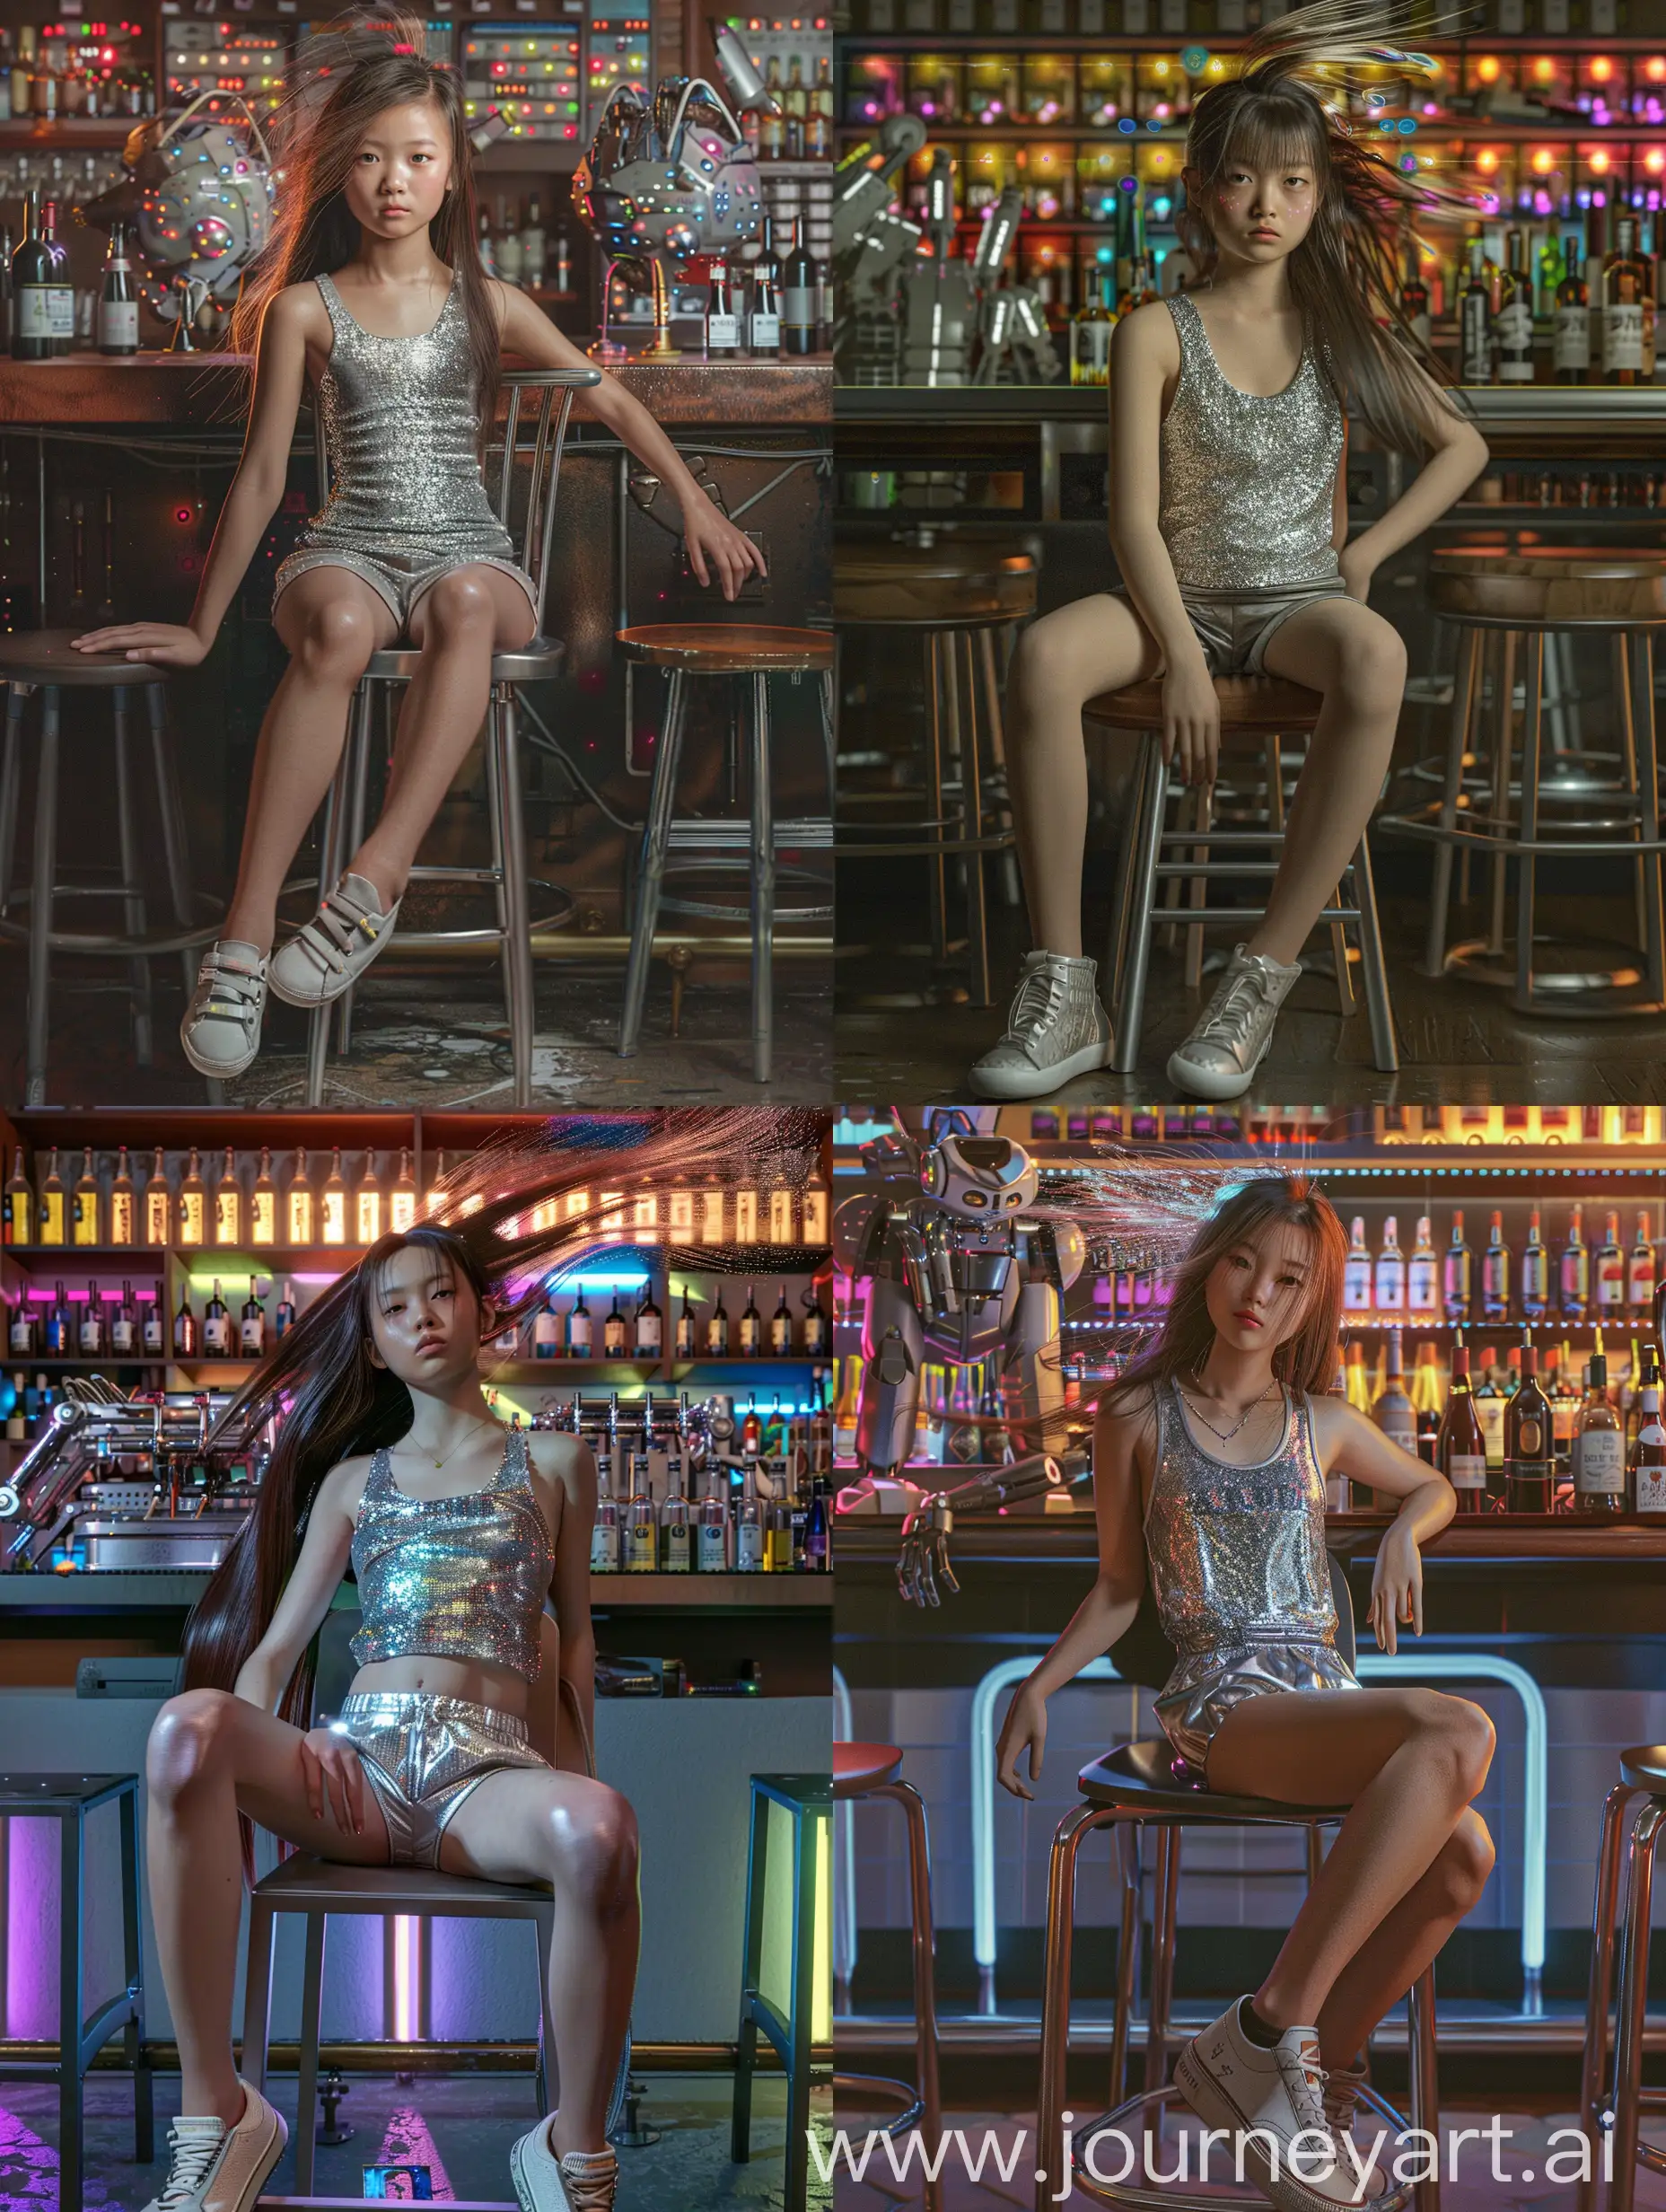 Realistic image of an Asian girl sitting on a high chair, a simple bar-style chair, the girl wears a sparkling silver tank top, short sports pants, her arms resting on the chair, her feet wearing canvas shoes, professional styling career, looking from the front, she has long thin hair flying randomly, behind her is a bar with many bottles of wine, the staff is a humanoid metal robot mixing, the light from many LED lights mix to create many artistic colors